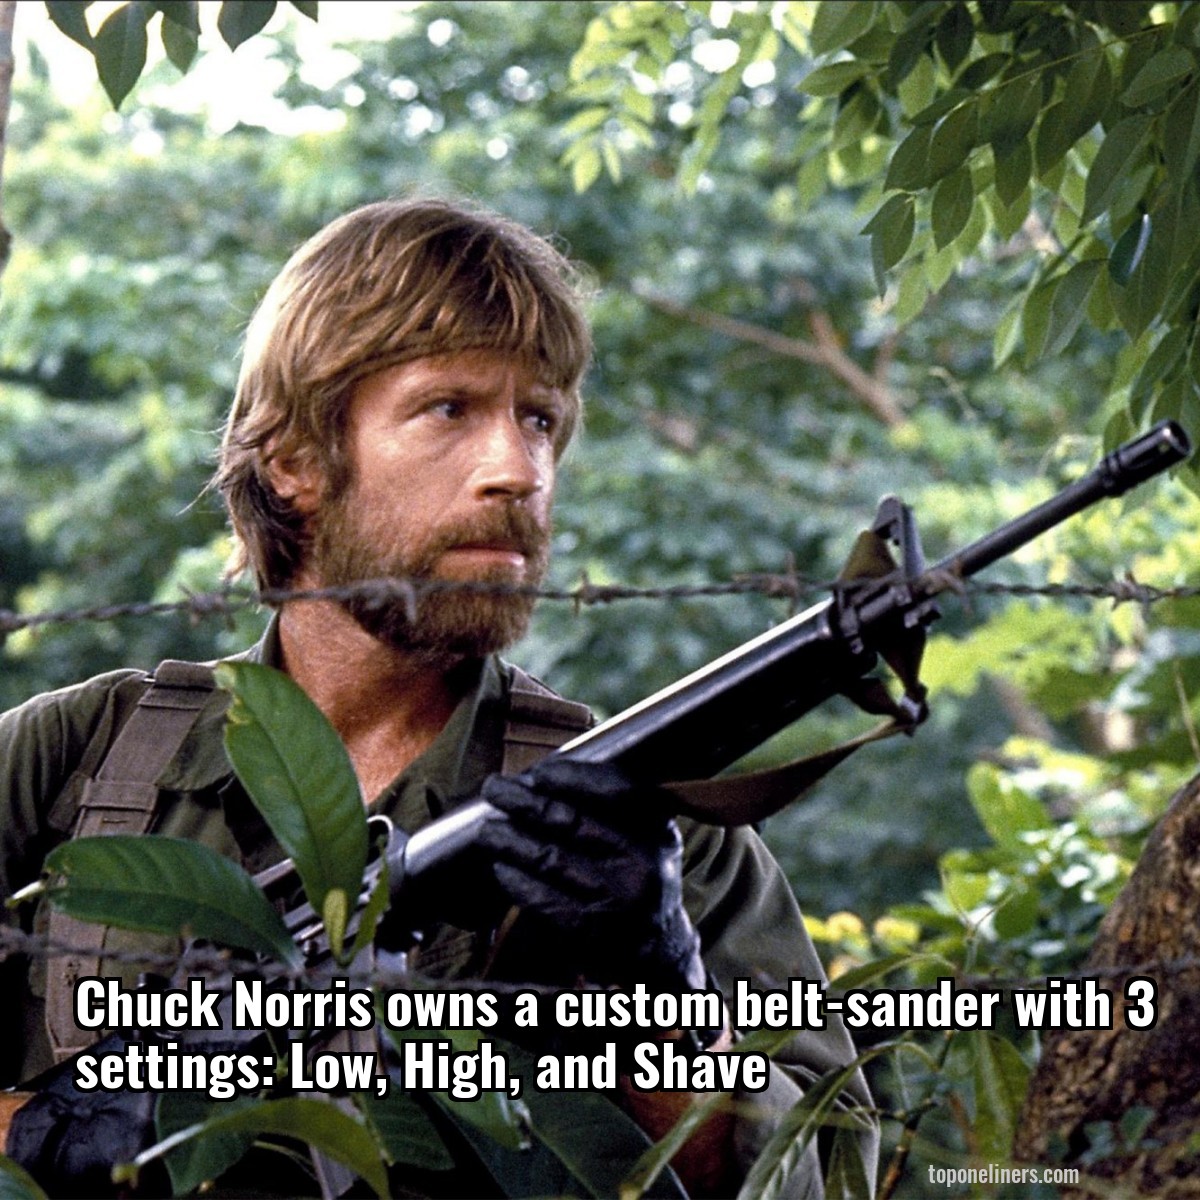 Chuck Norris owns a custom belt-sander with 3 settings: Low, High, and Shave